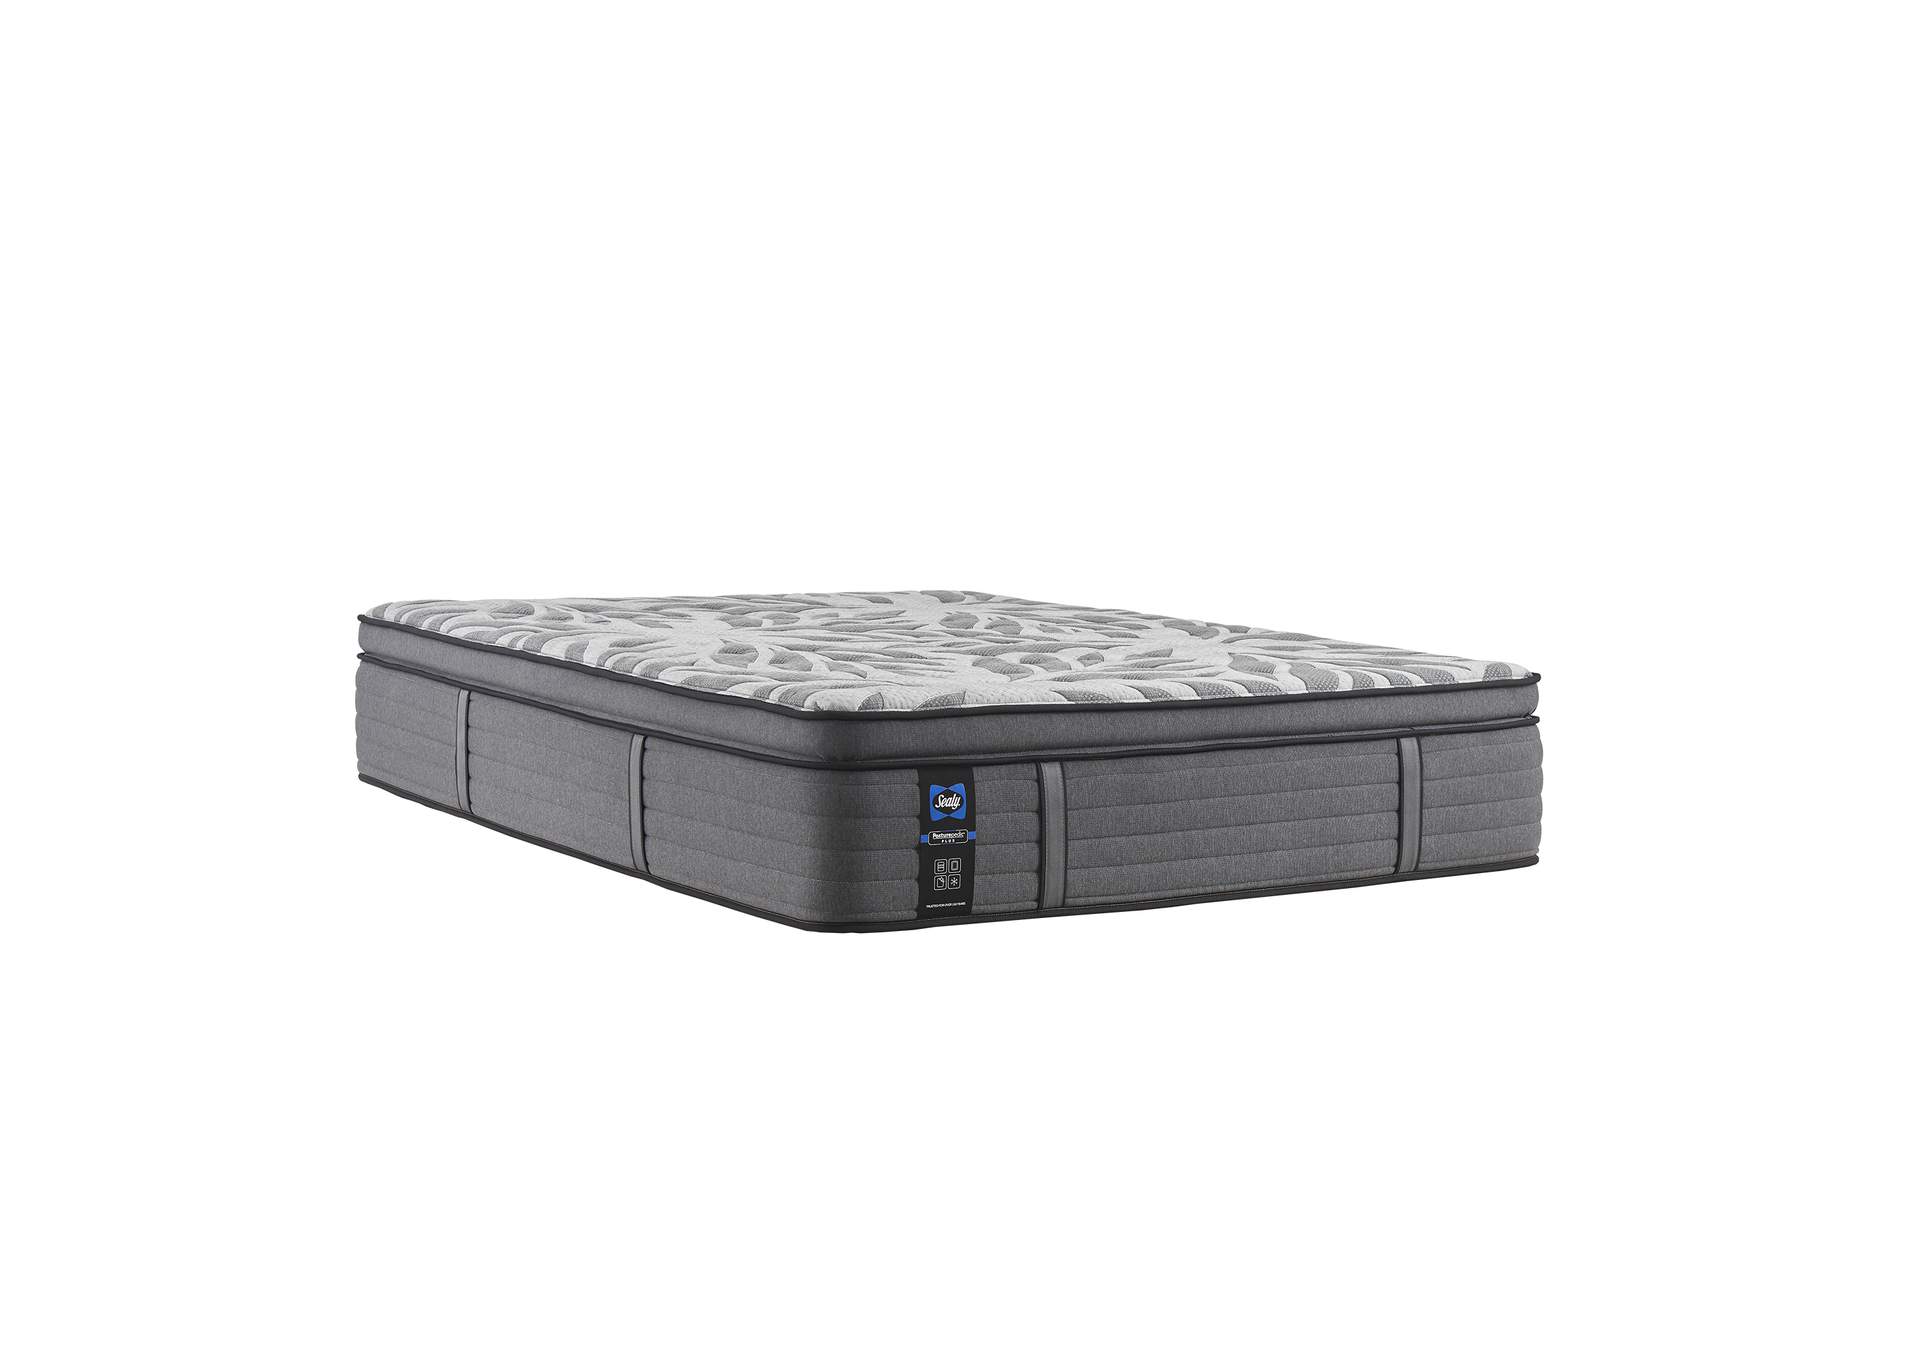 Satisfied II Soft Pillow Top Full Mattress,Sealy